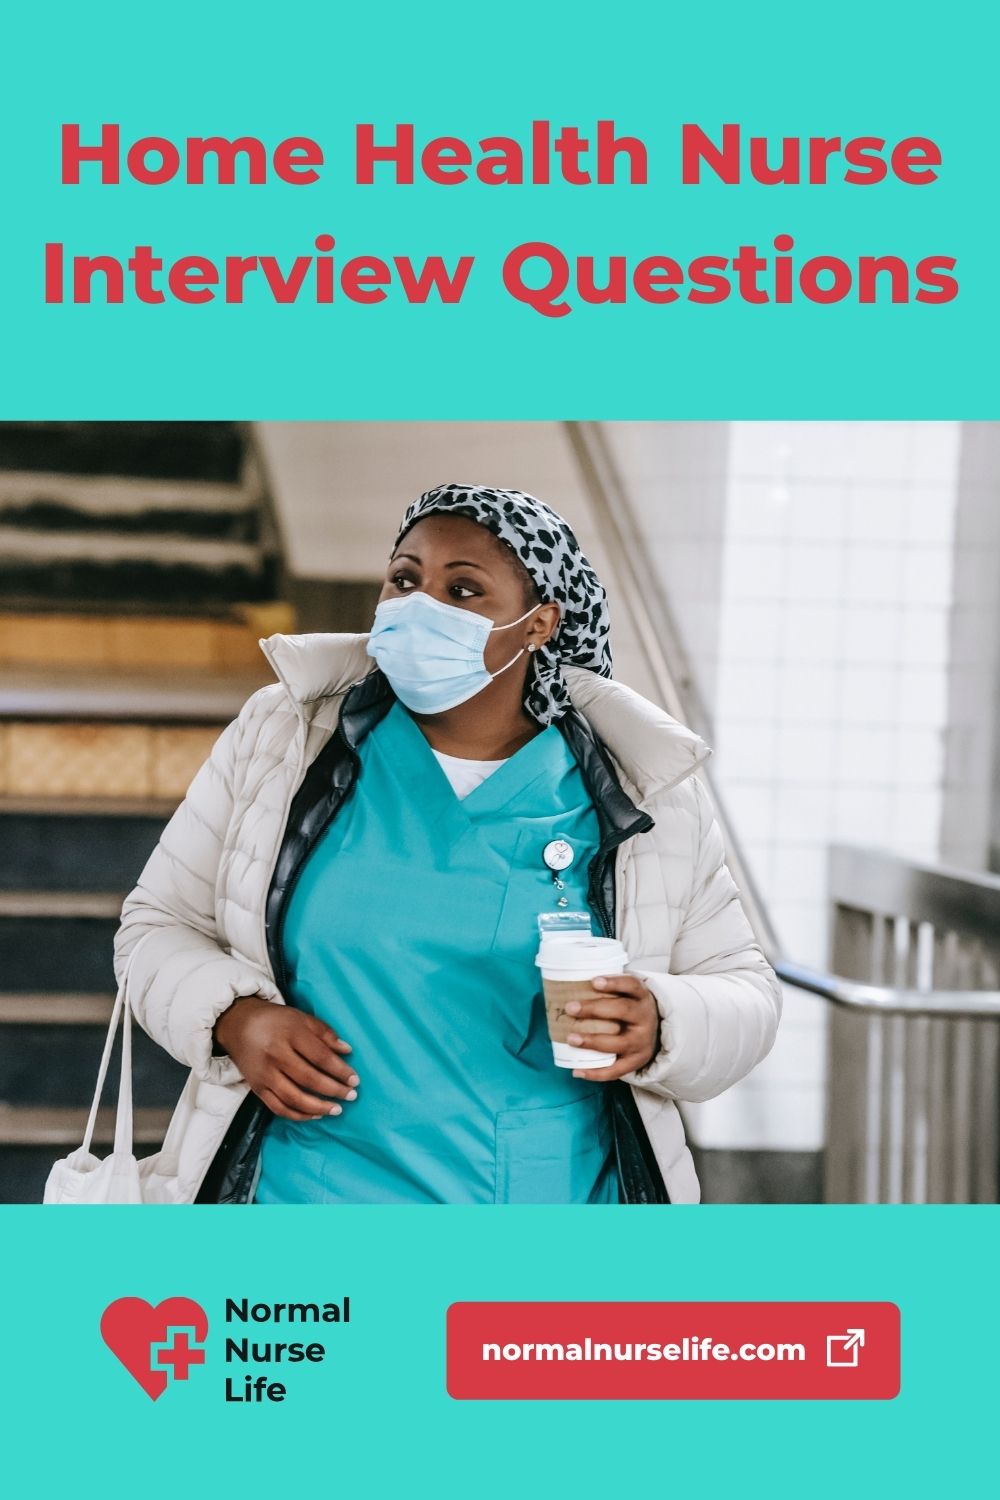 Interview questions for home health nurses